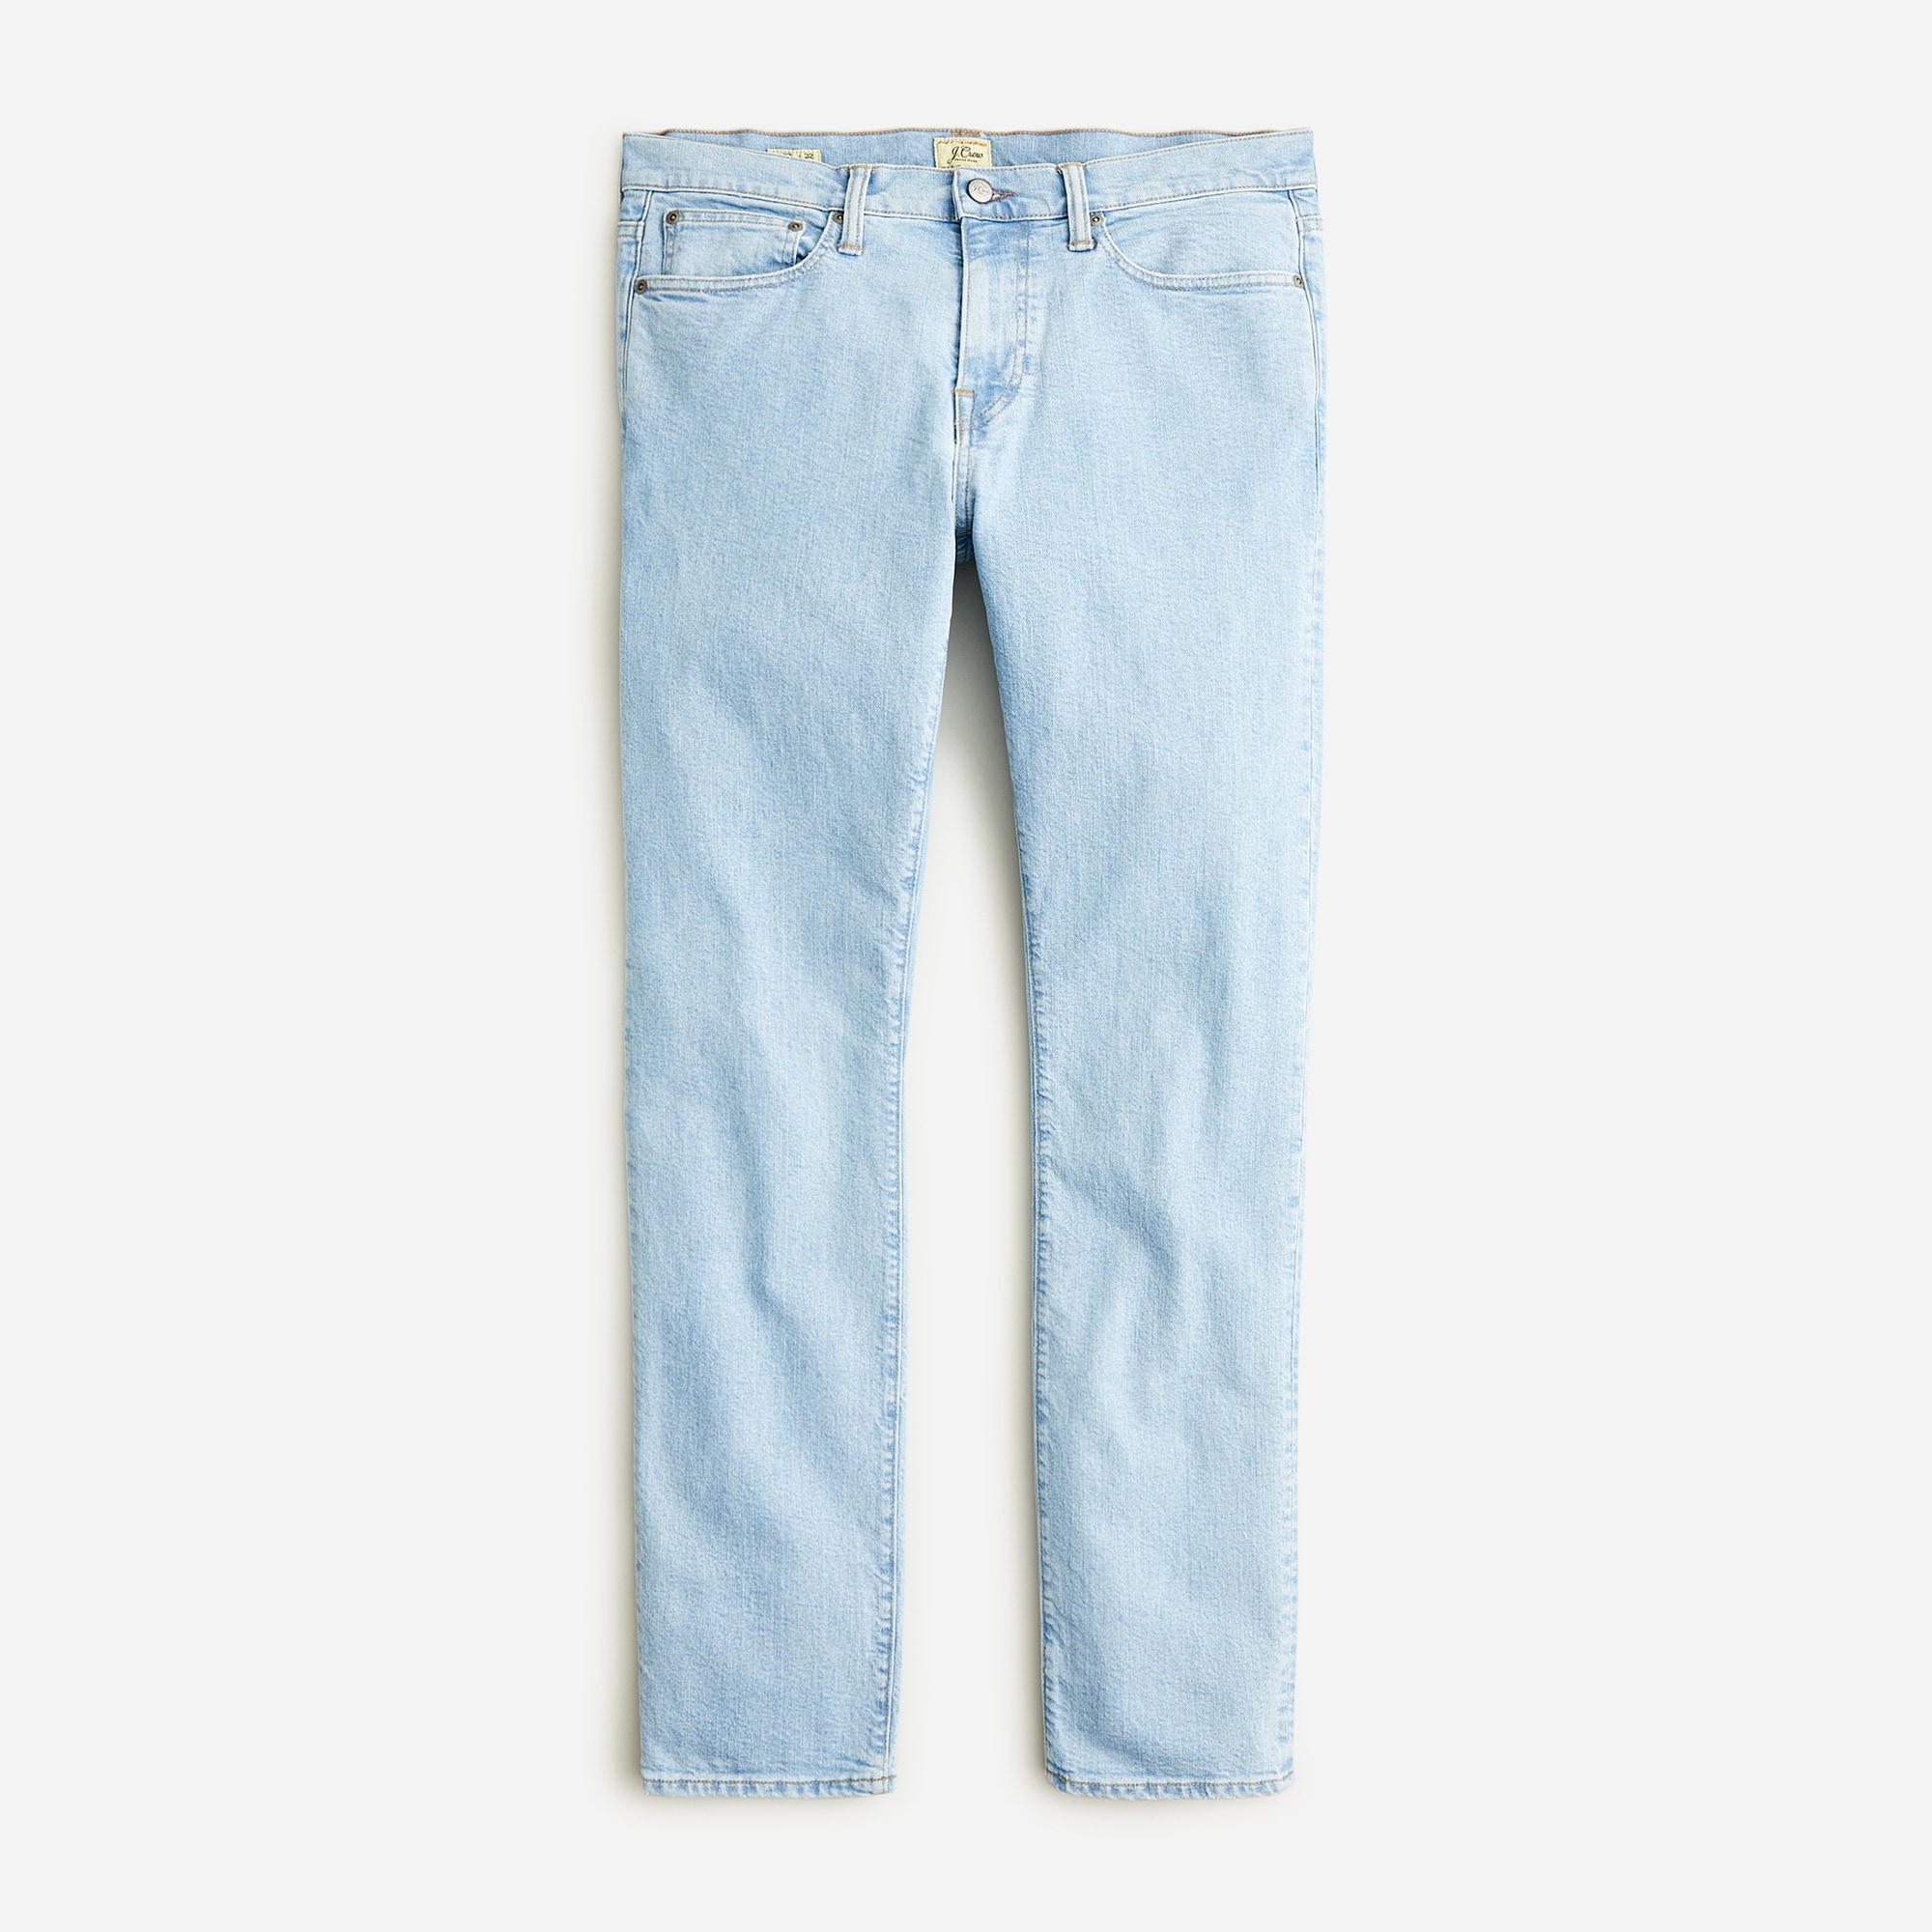 mens 484 Slim-fit stretch jean in seven-year wash